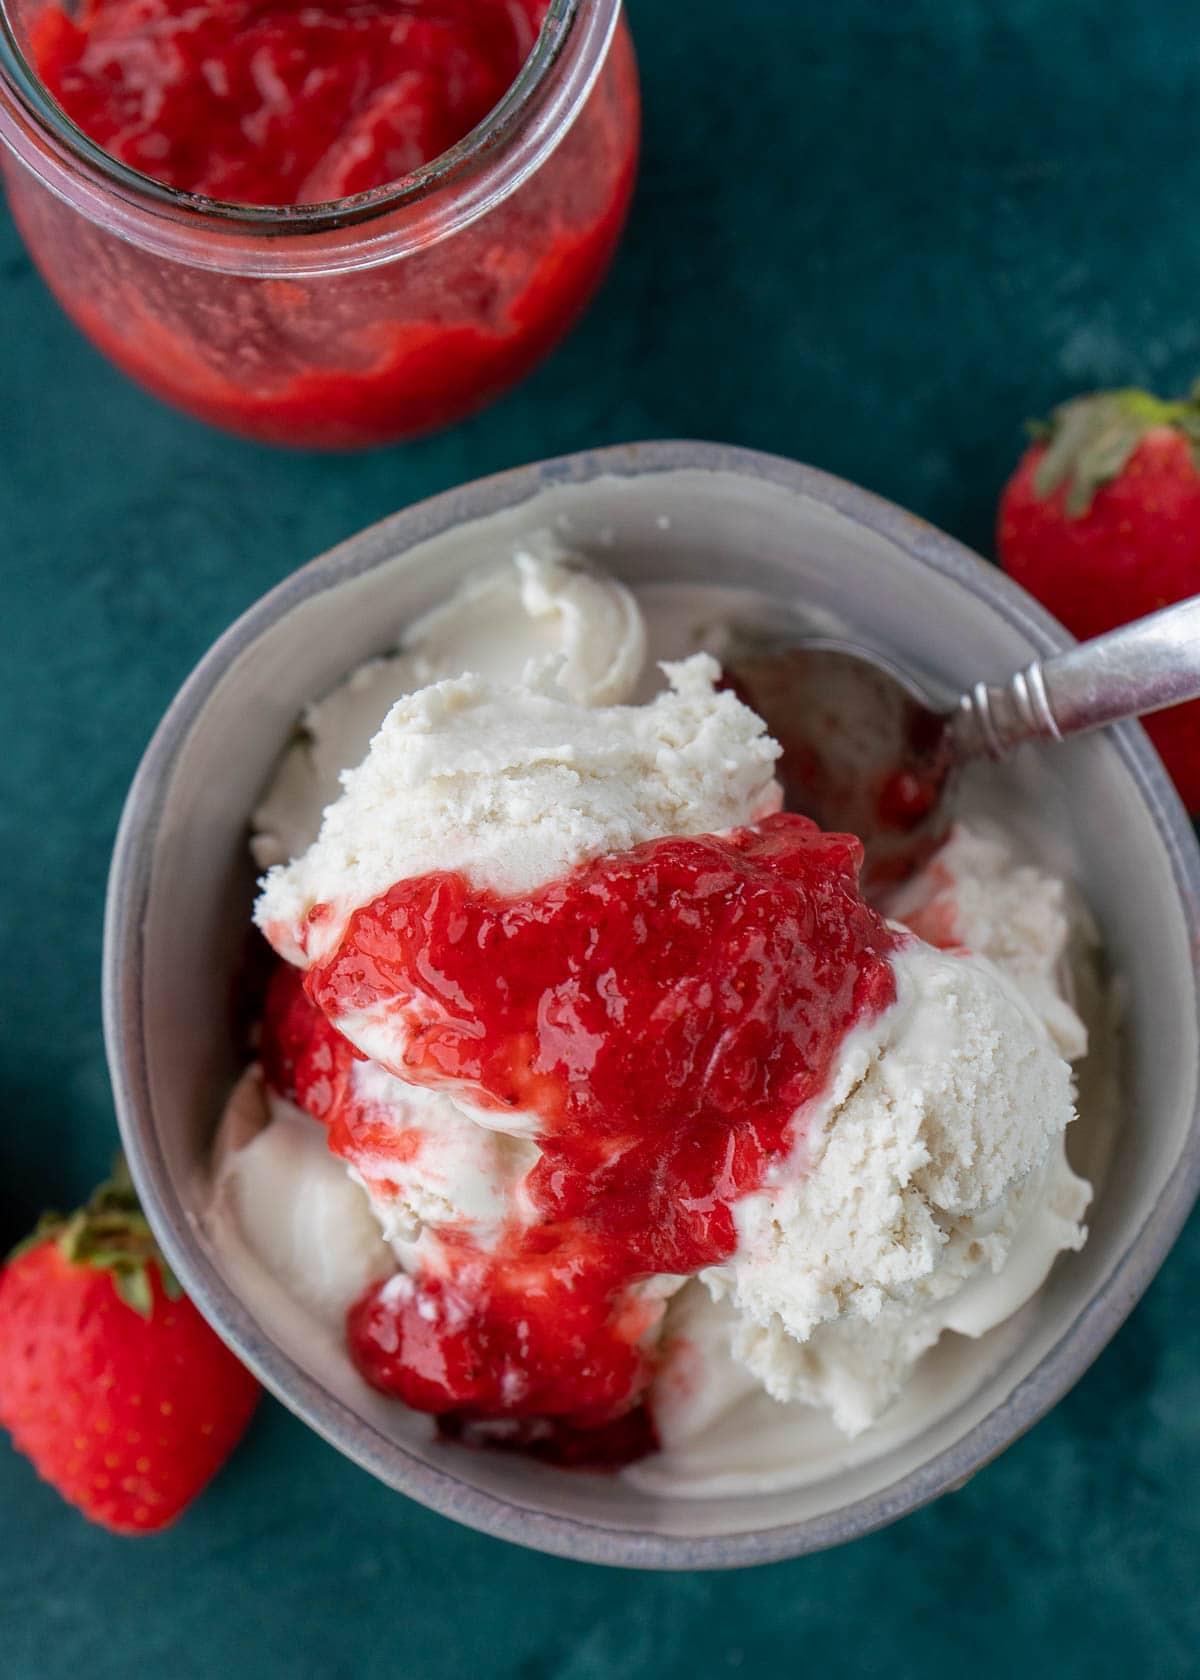 Overhead view of a bowl of vanilla ice cream topped with strawberry sauce, with a spoon in it, next to some strawberries and a jar of sauce